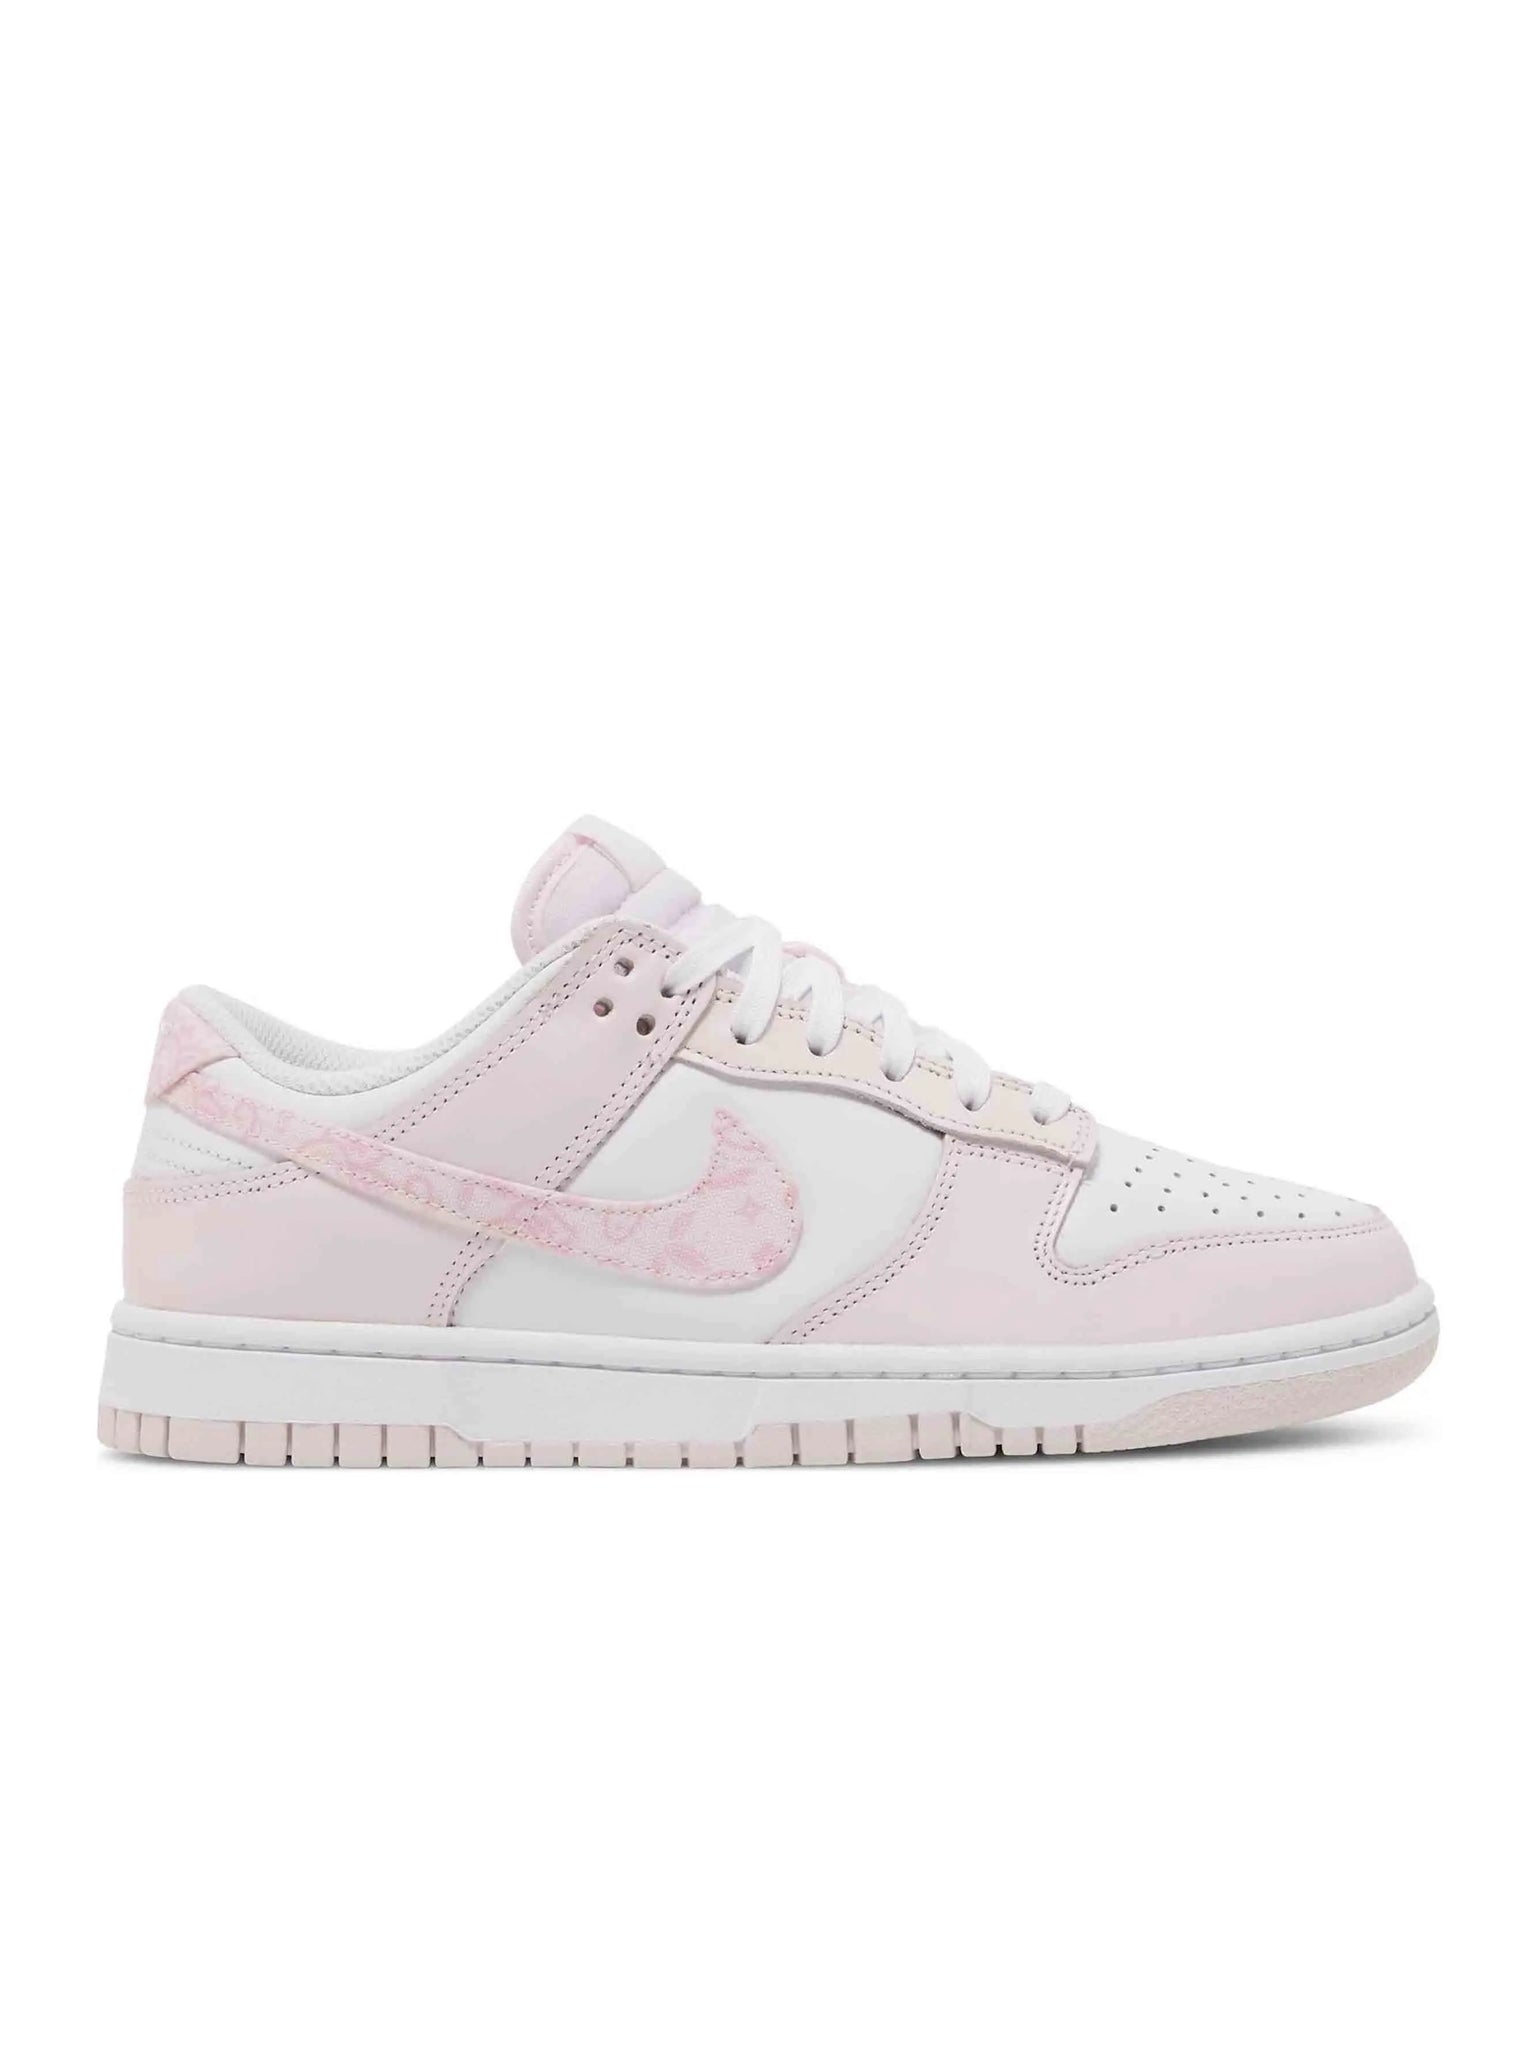 Nike Dunk Low Essential Paisley Pack Pink (W) Prior